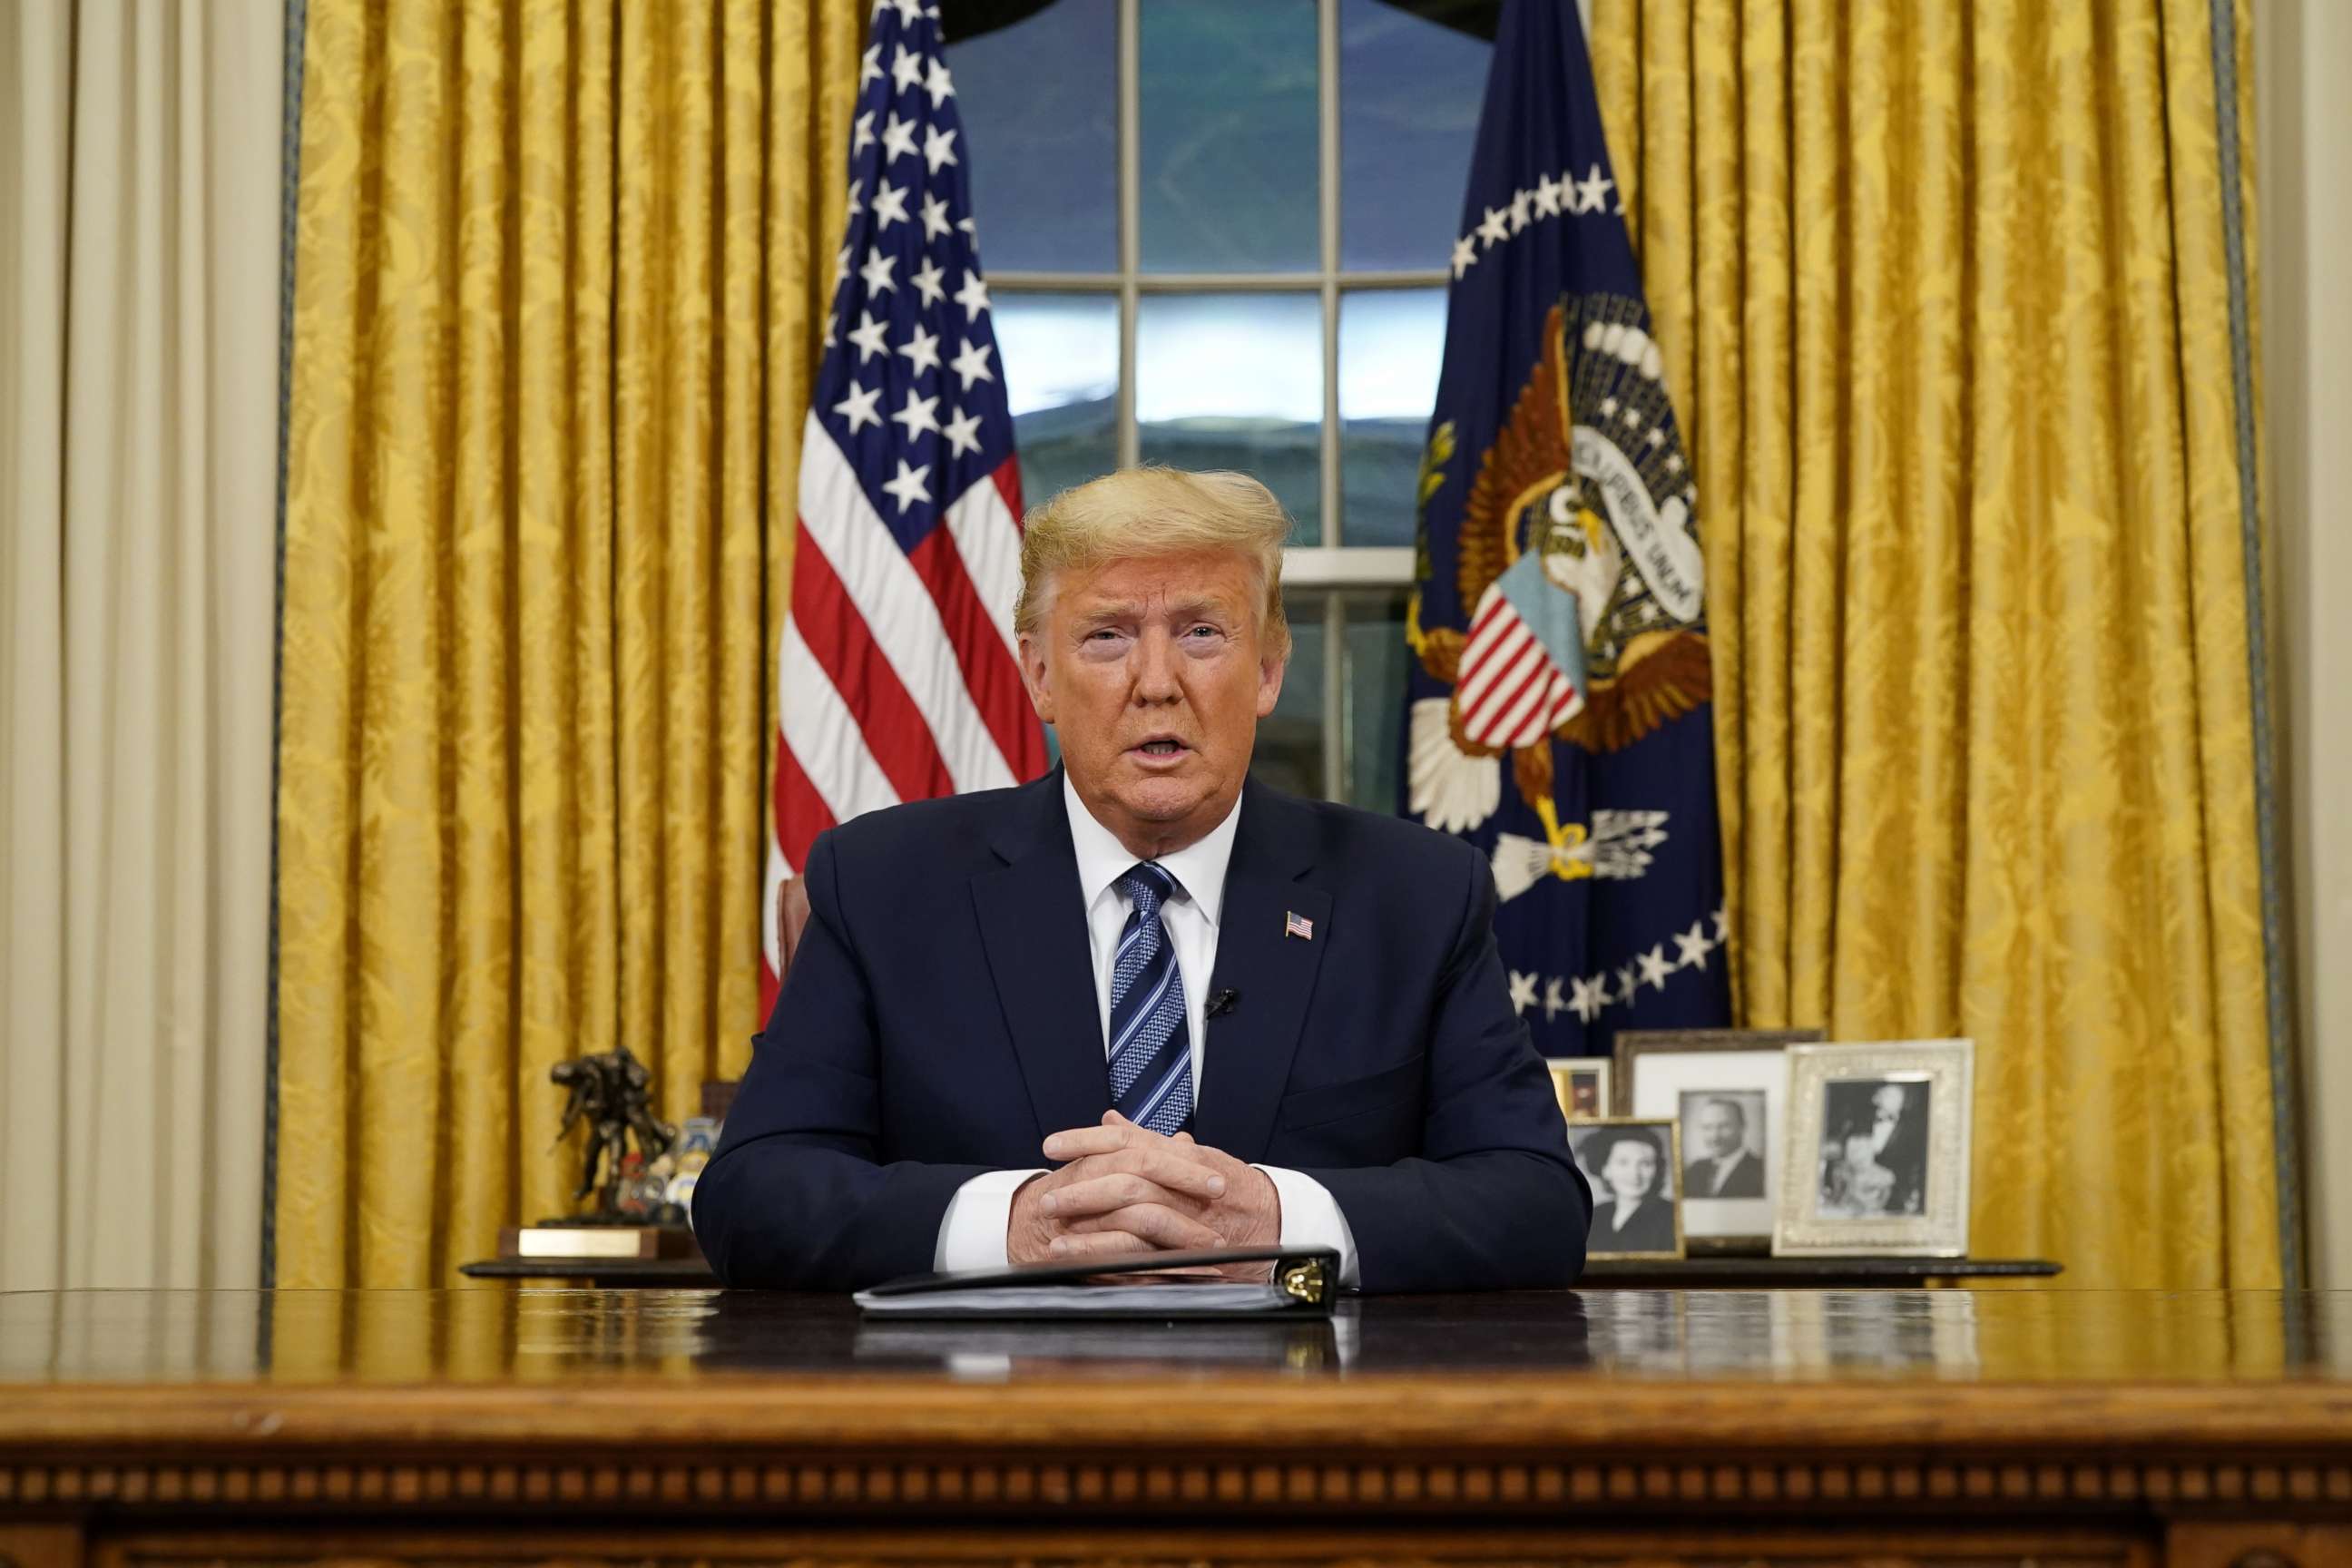 PHOTO: U.S. President Donald Trump speaks about the U.S response to the COVID-19 coronavirus pandemic during an address to the nation from the Oval Office of the White House in Washington, U.S., March 11, 2020.